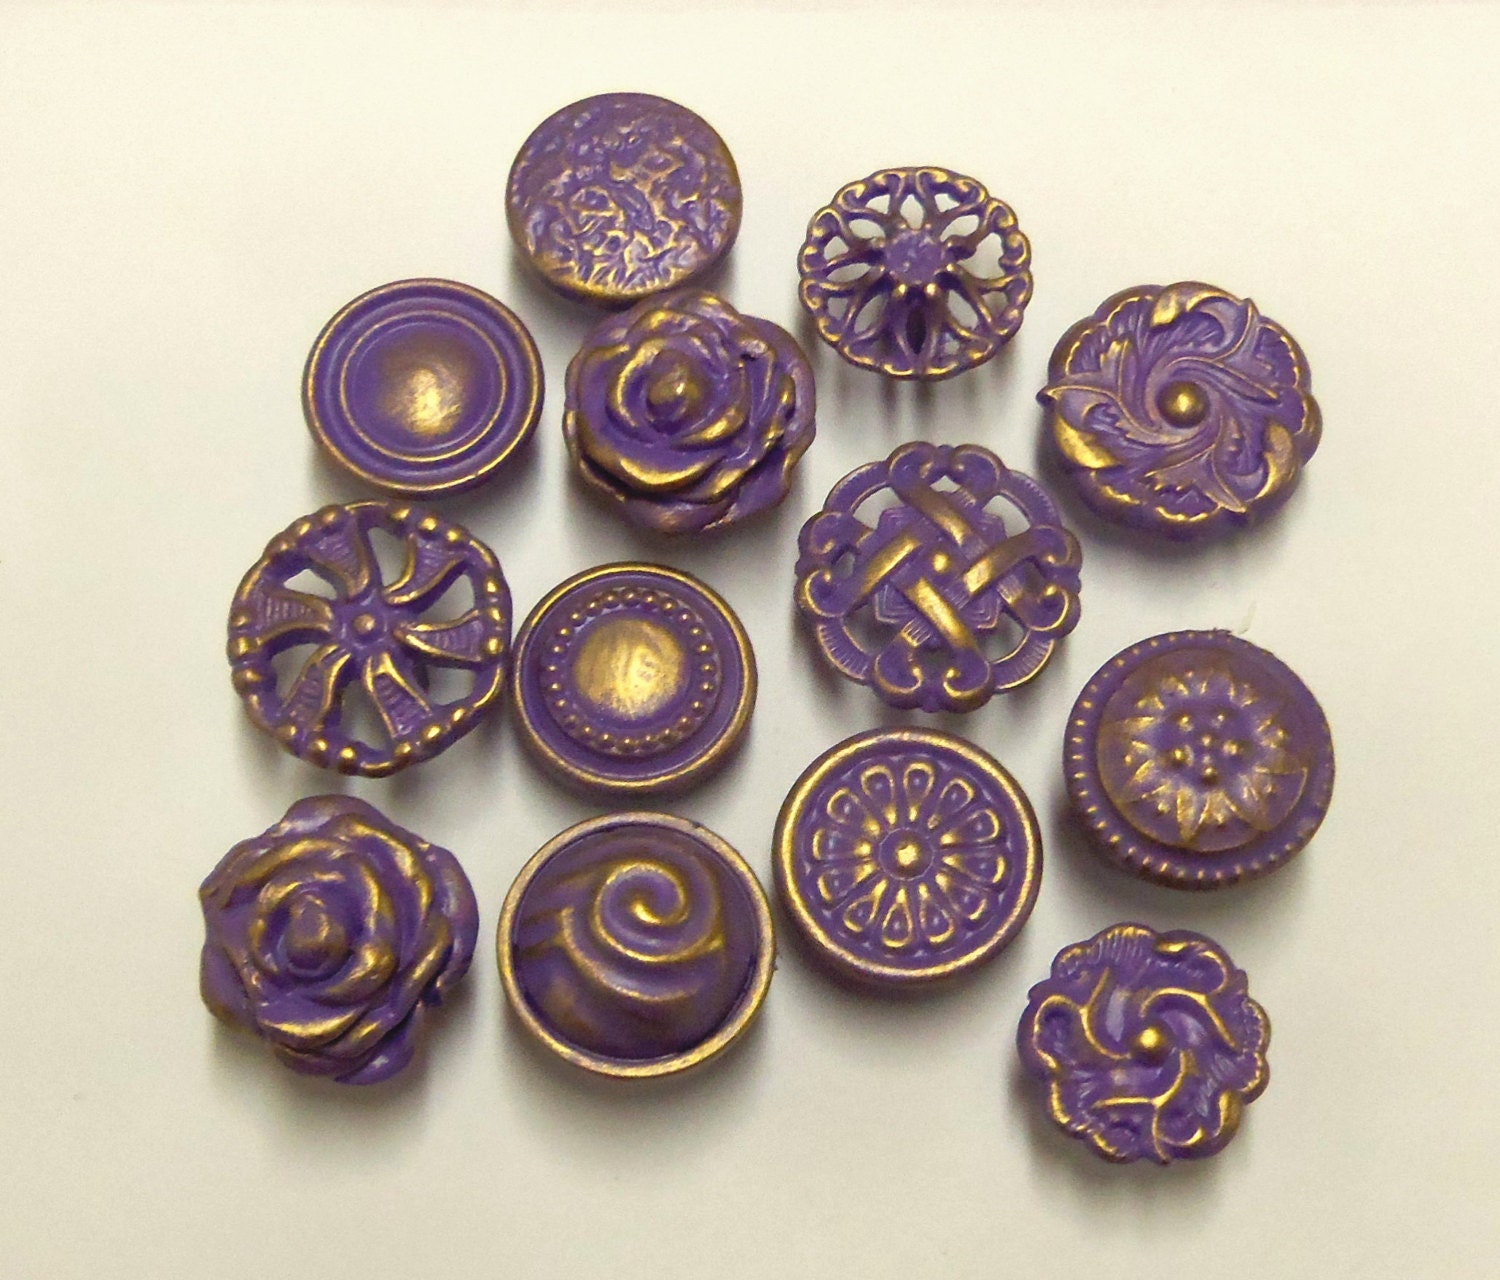 FREE SHIPPING Drawer Pulls Knobs Purple Amethyst Collection 12